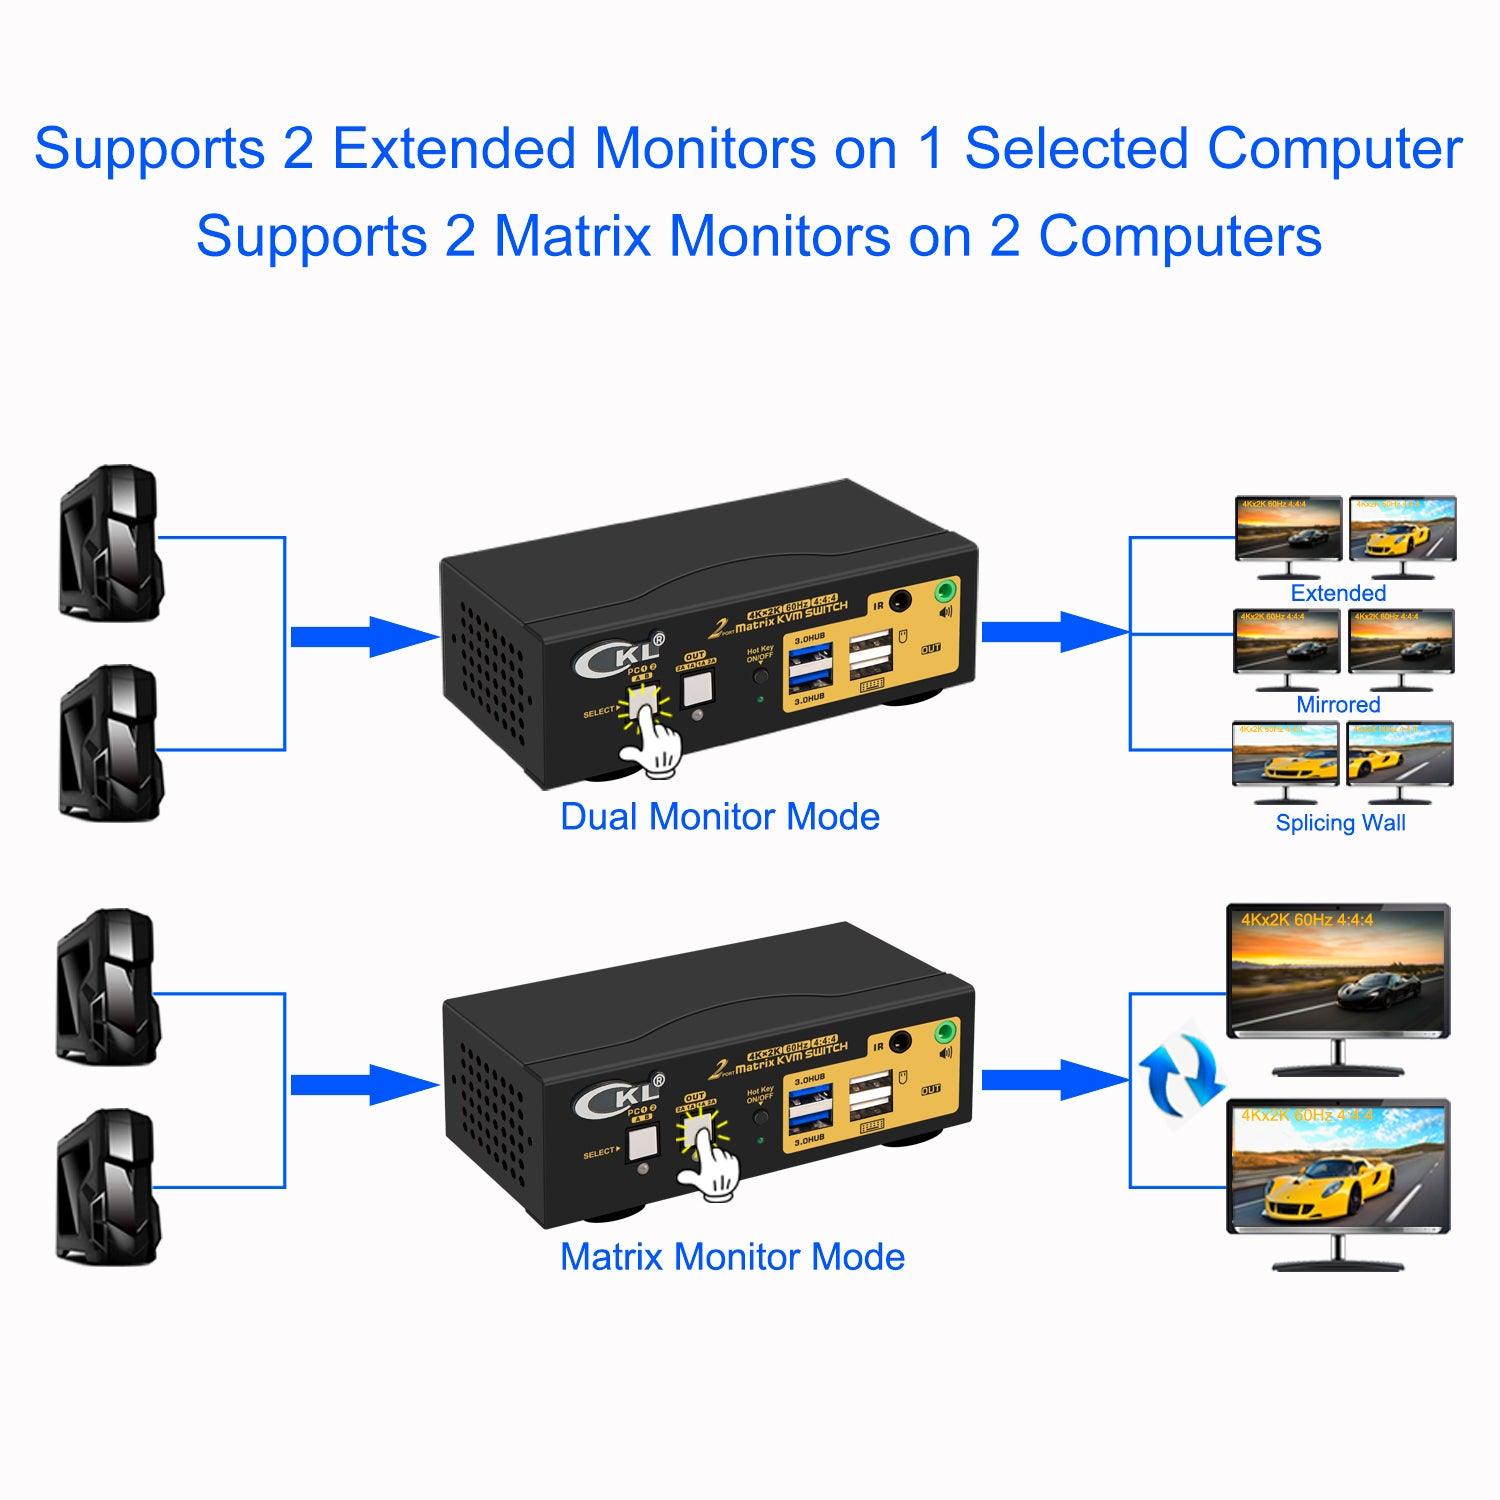 CKL 2x2 Matrix DisplayPort +HDMI KVM Switch Dual Monitor USB 3.0 4K 60Hz, PC Monitor Keyboard Mouse Peripherals Sharing Box with Cables for 2 Computers or Laptops CKL-622DH-M - CKL KVM Switches